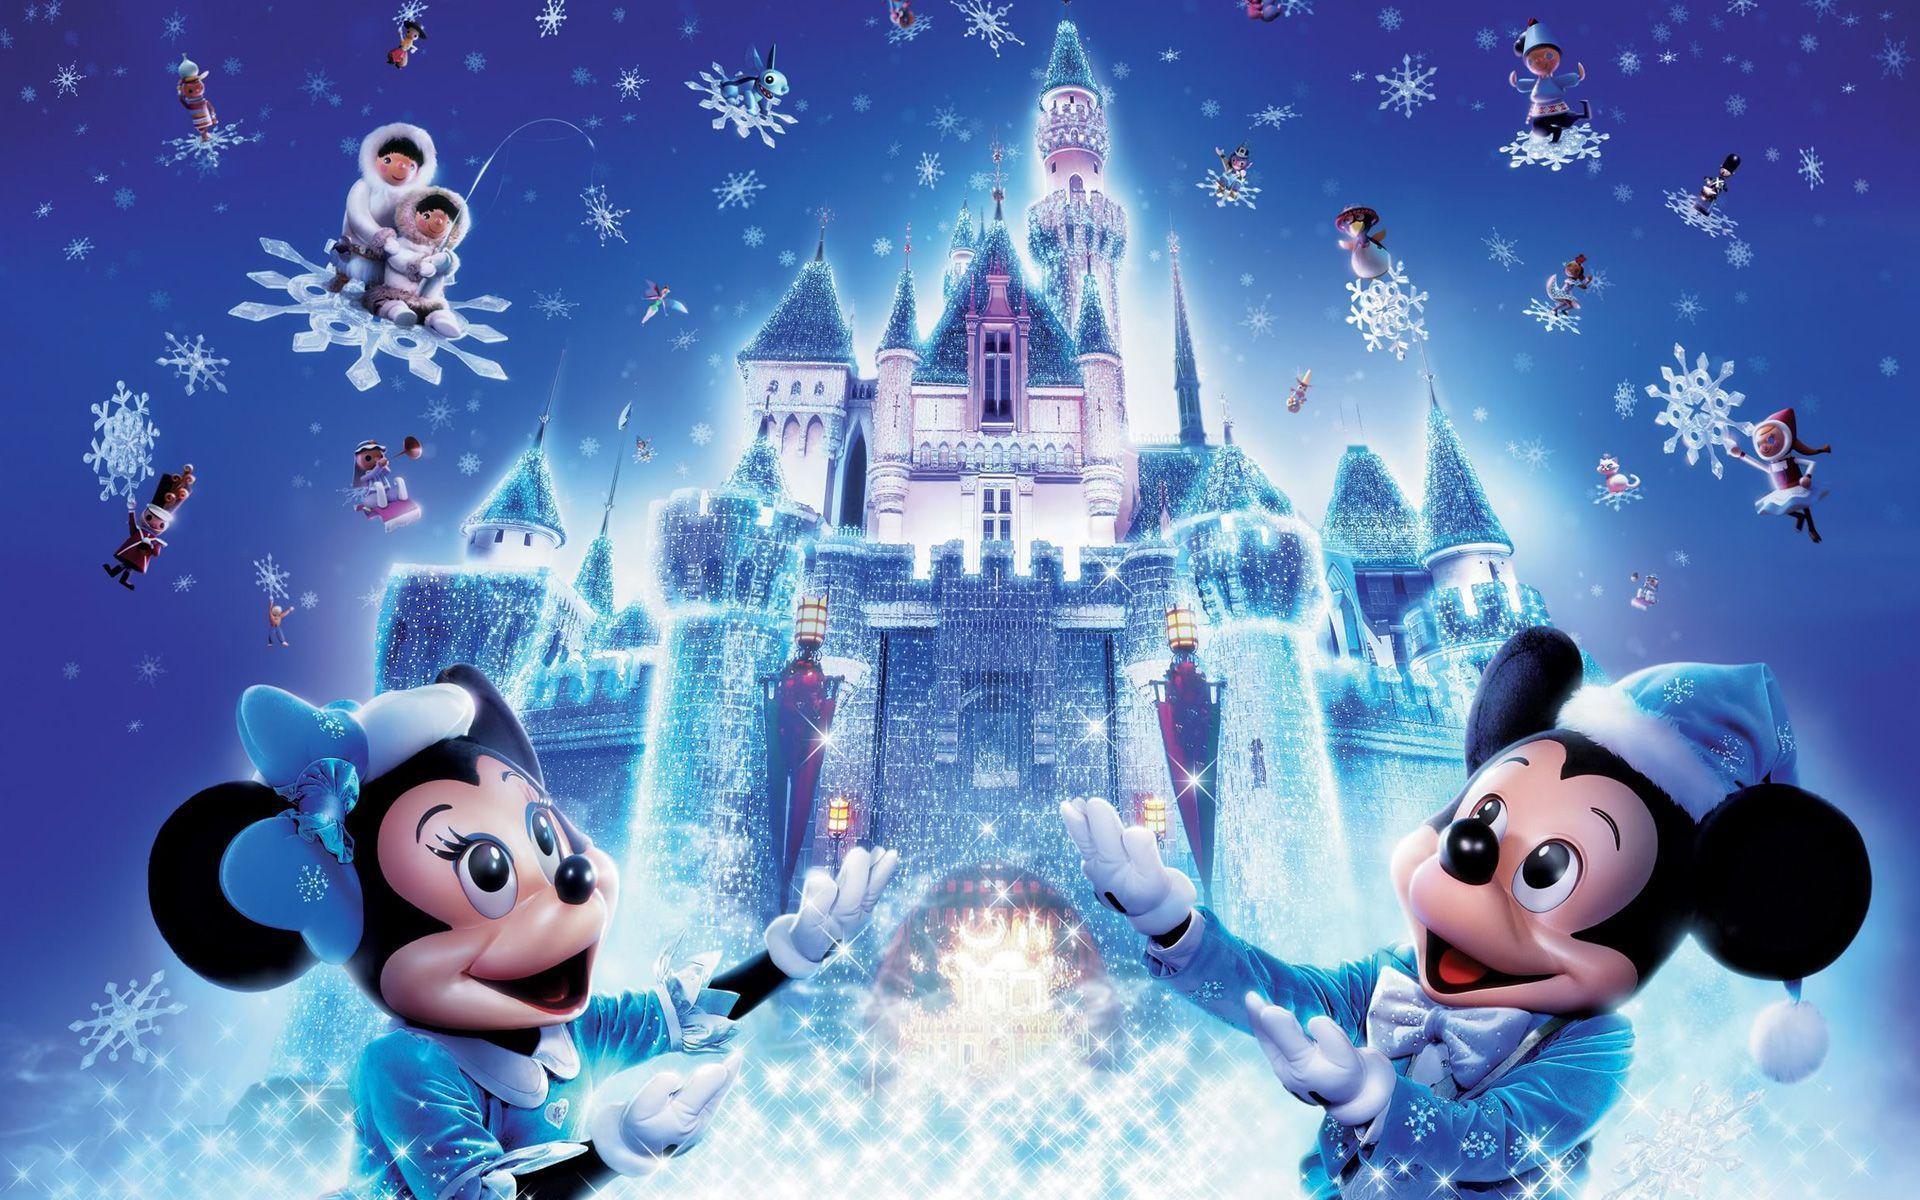 Disney wallpaper at Christmas time all in HD from Donald to mickey